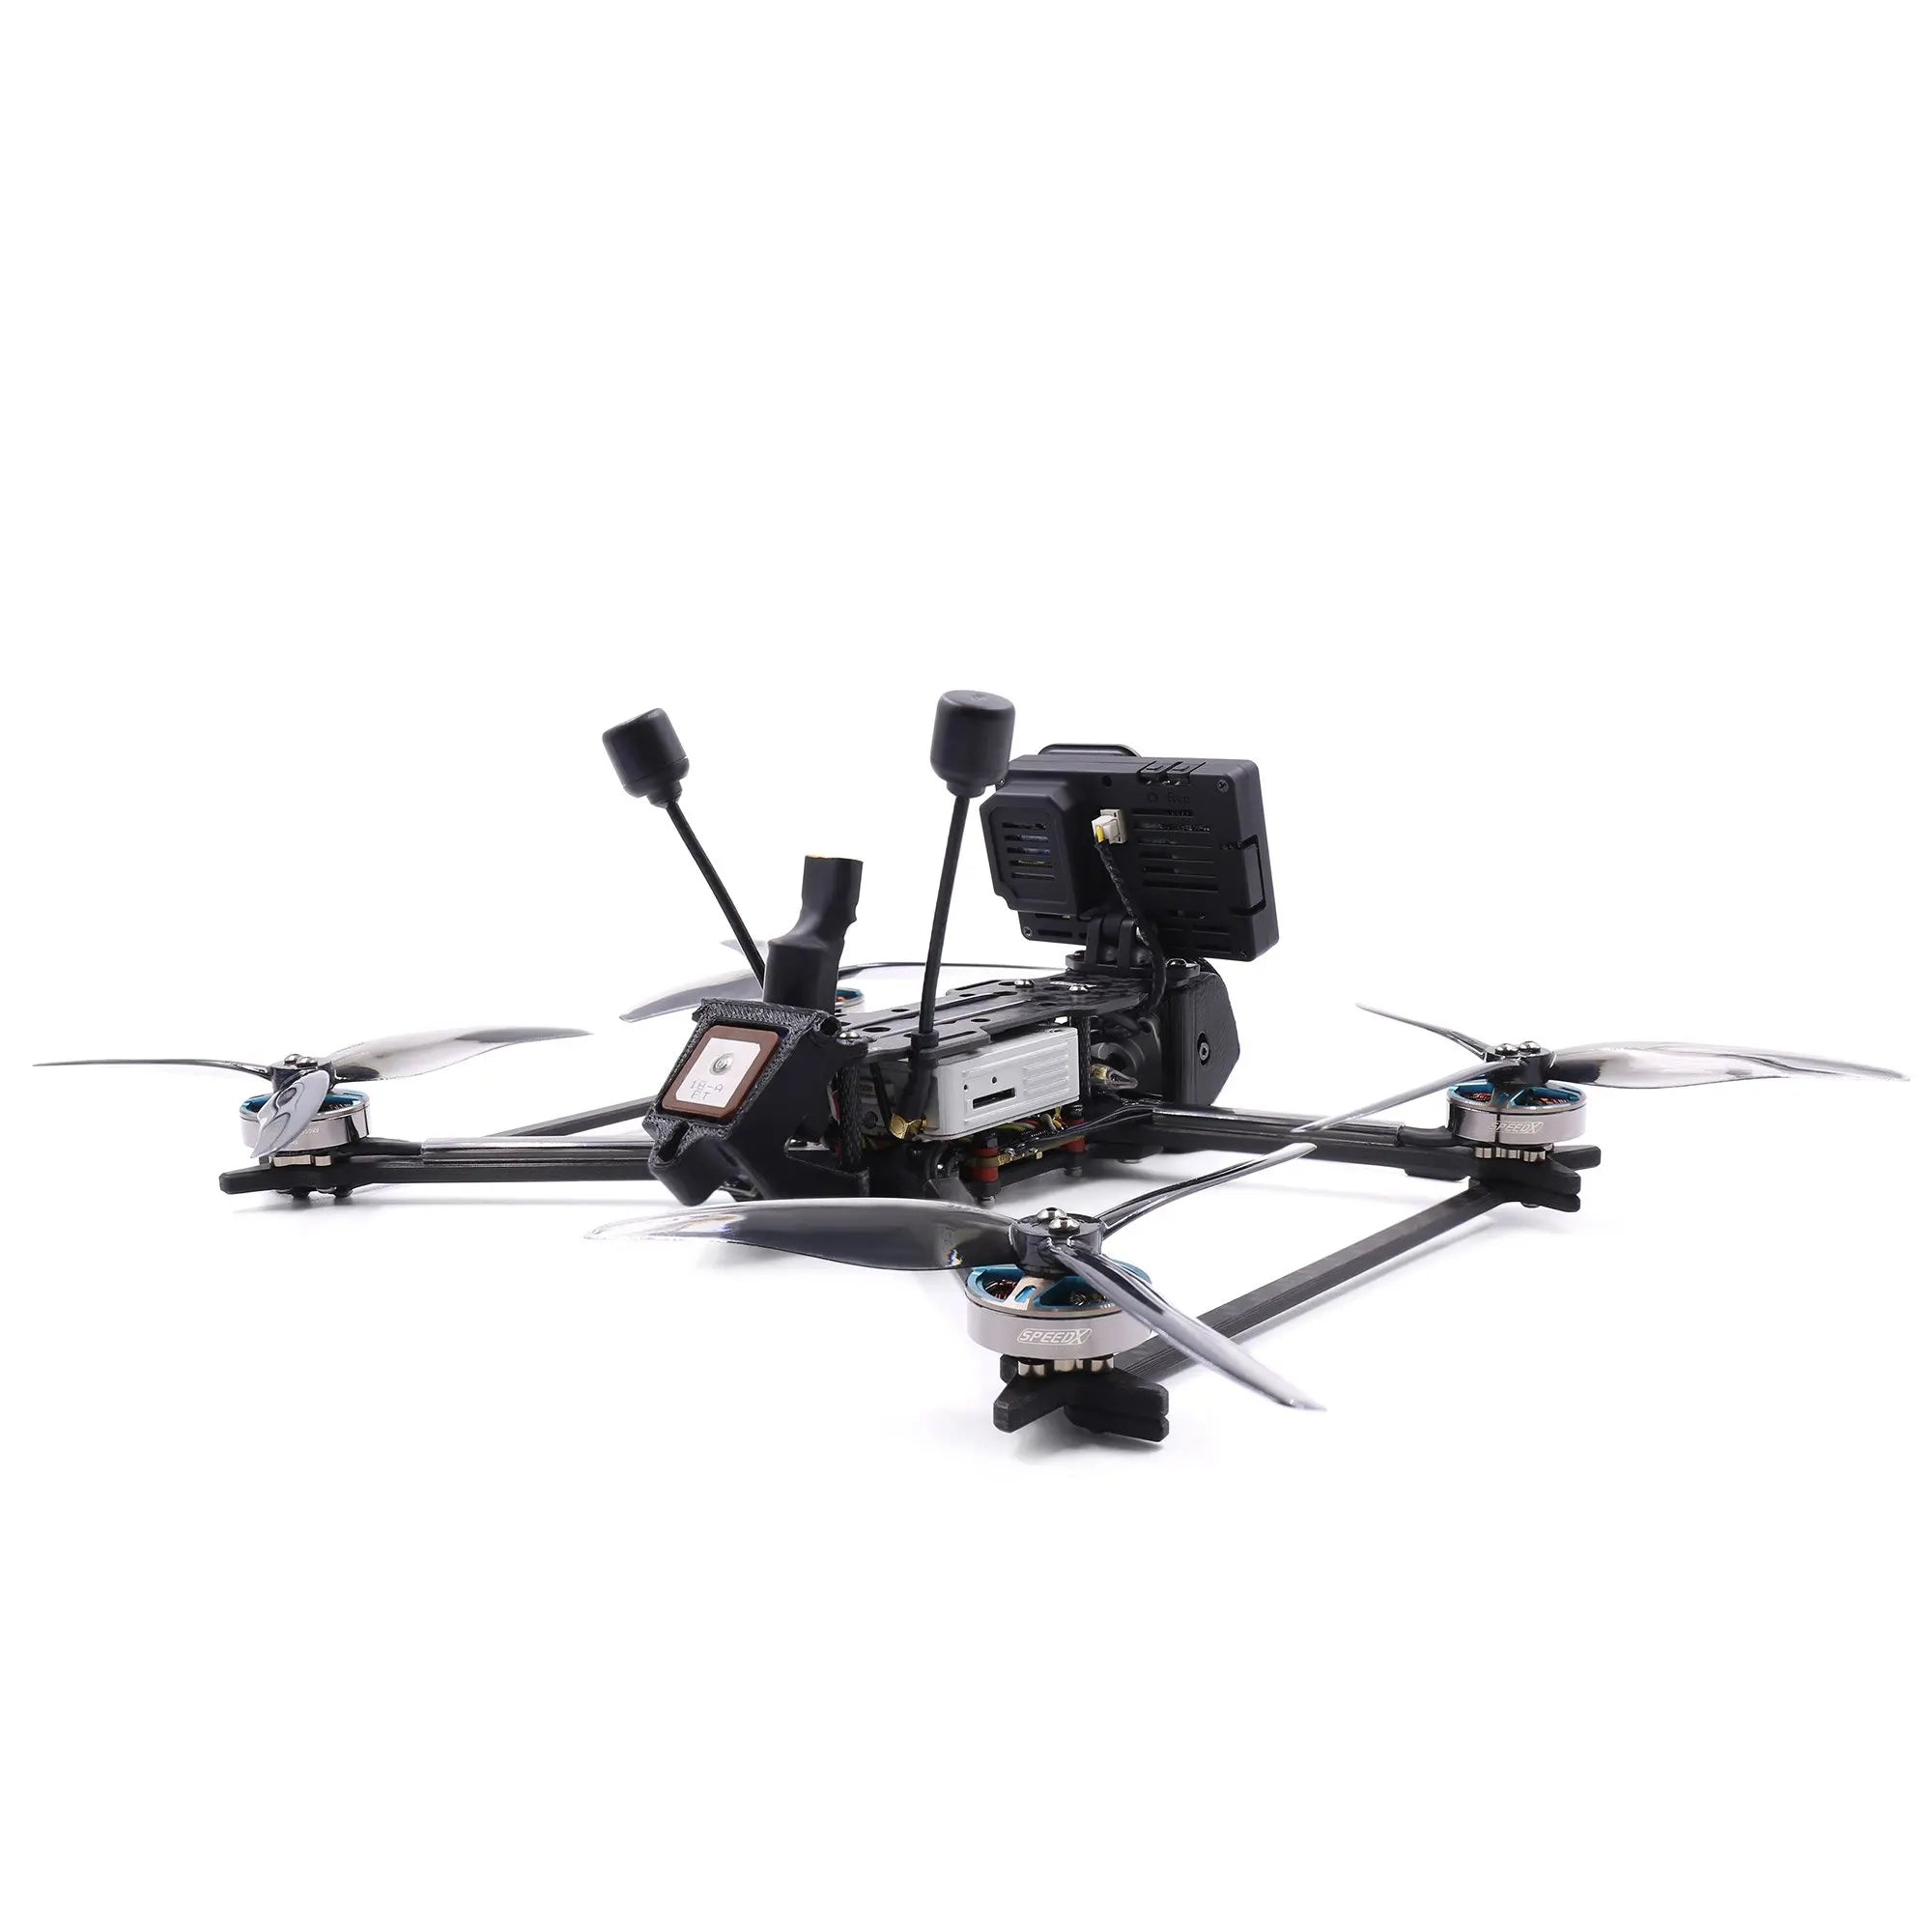 GEPRC Crocodile5 Baby FPV Drone, It is Light-weight, Long Range and has excellent flight performance